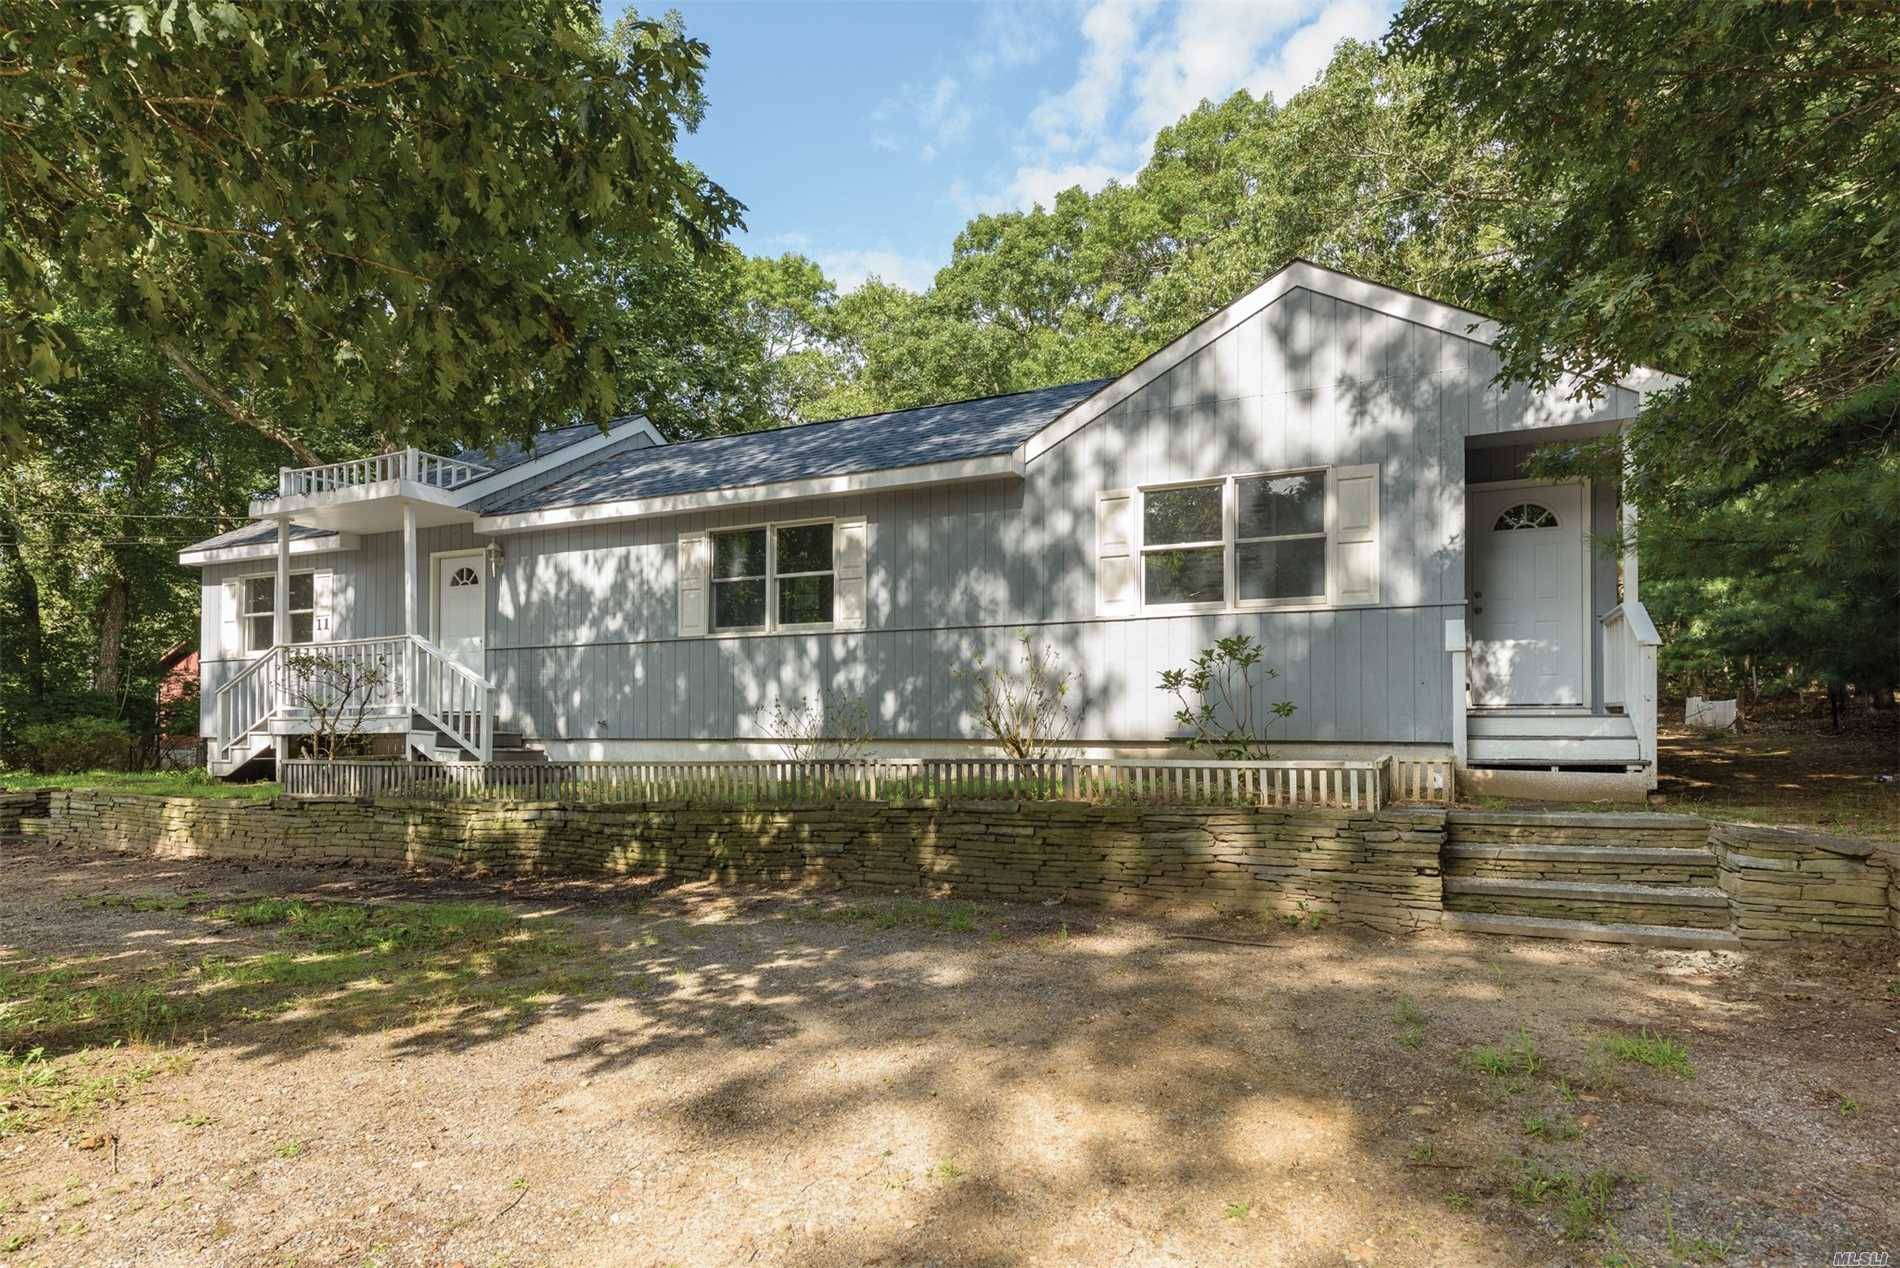 This 3 Bed, 2 Bath Sprawling One-Level Home On A Quiet Dead-End Street, Is Close To Three Mile Harbor In East Hampton's Springs.